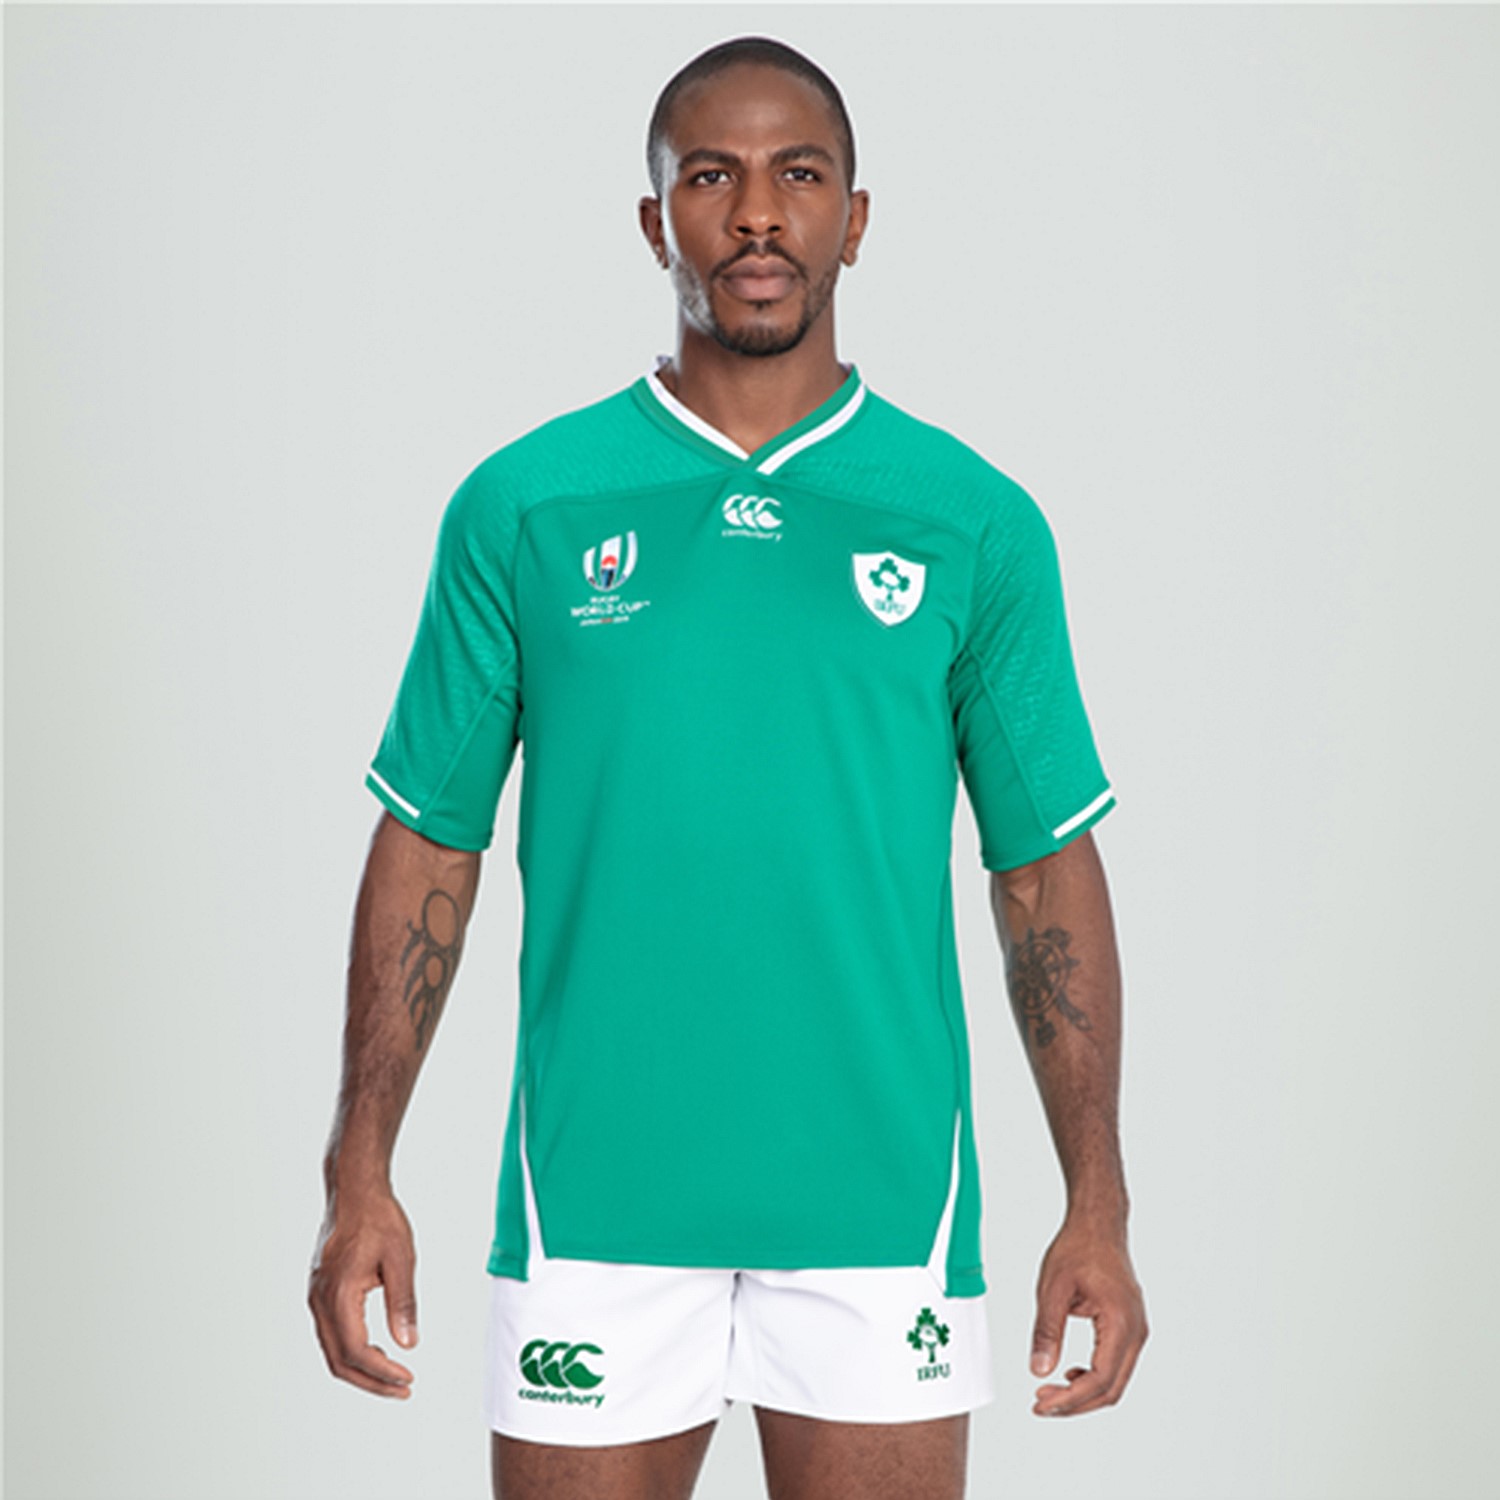 ireland rugby jersey player fit